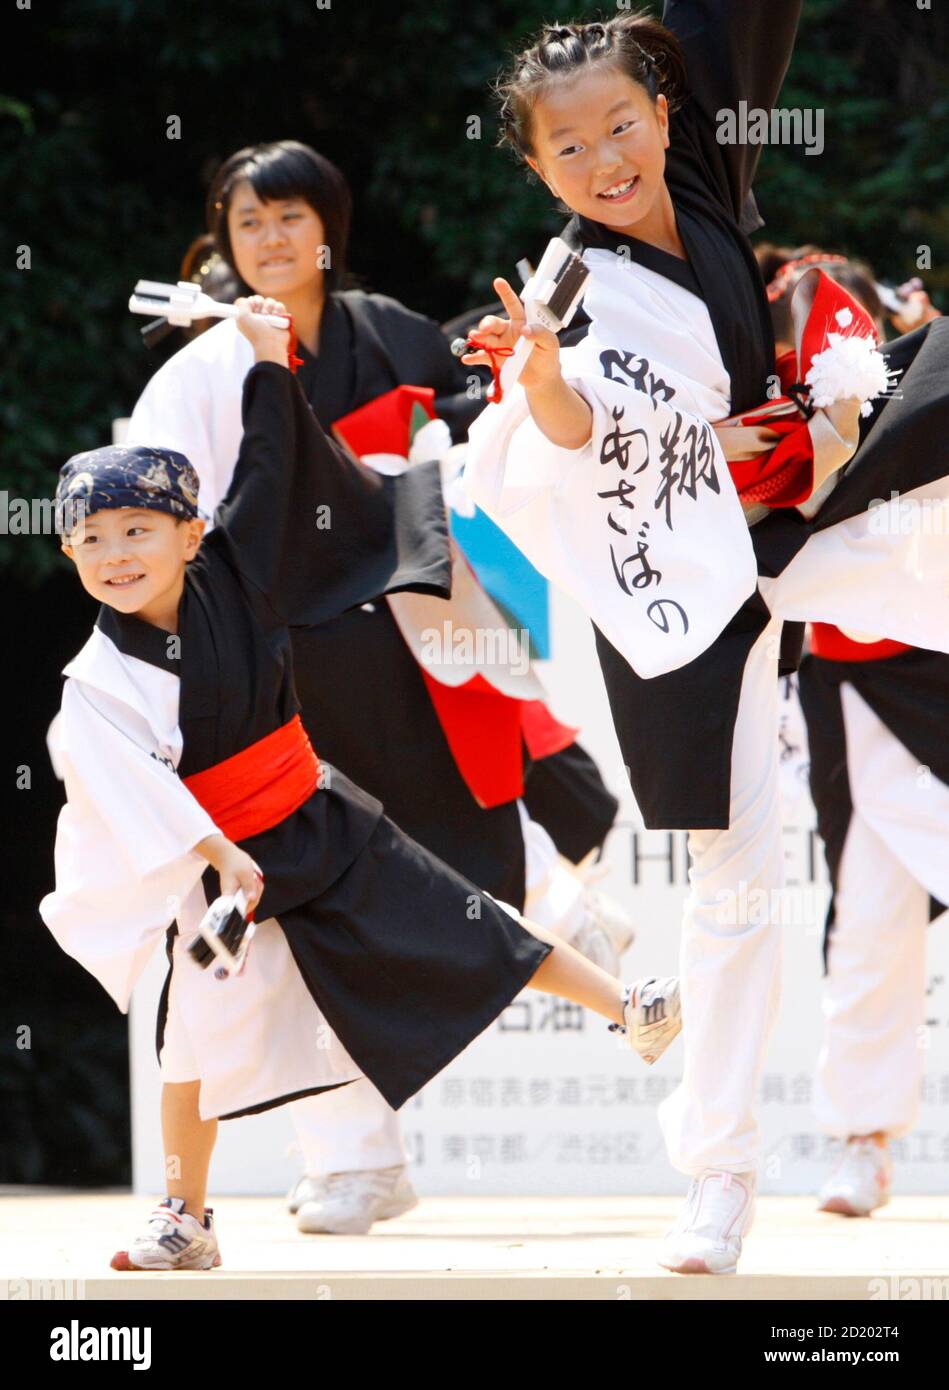 Folk dancers perform on the stage during the Super Yosakoi 2007 in Tokyo August 26, 2007. About 6,000 dancers from 100 teams took part in the folk song and dance festival, local media reported.   REUTERS/Kim Kyung-Hoon (JAPAN) Stock Photo